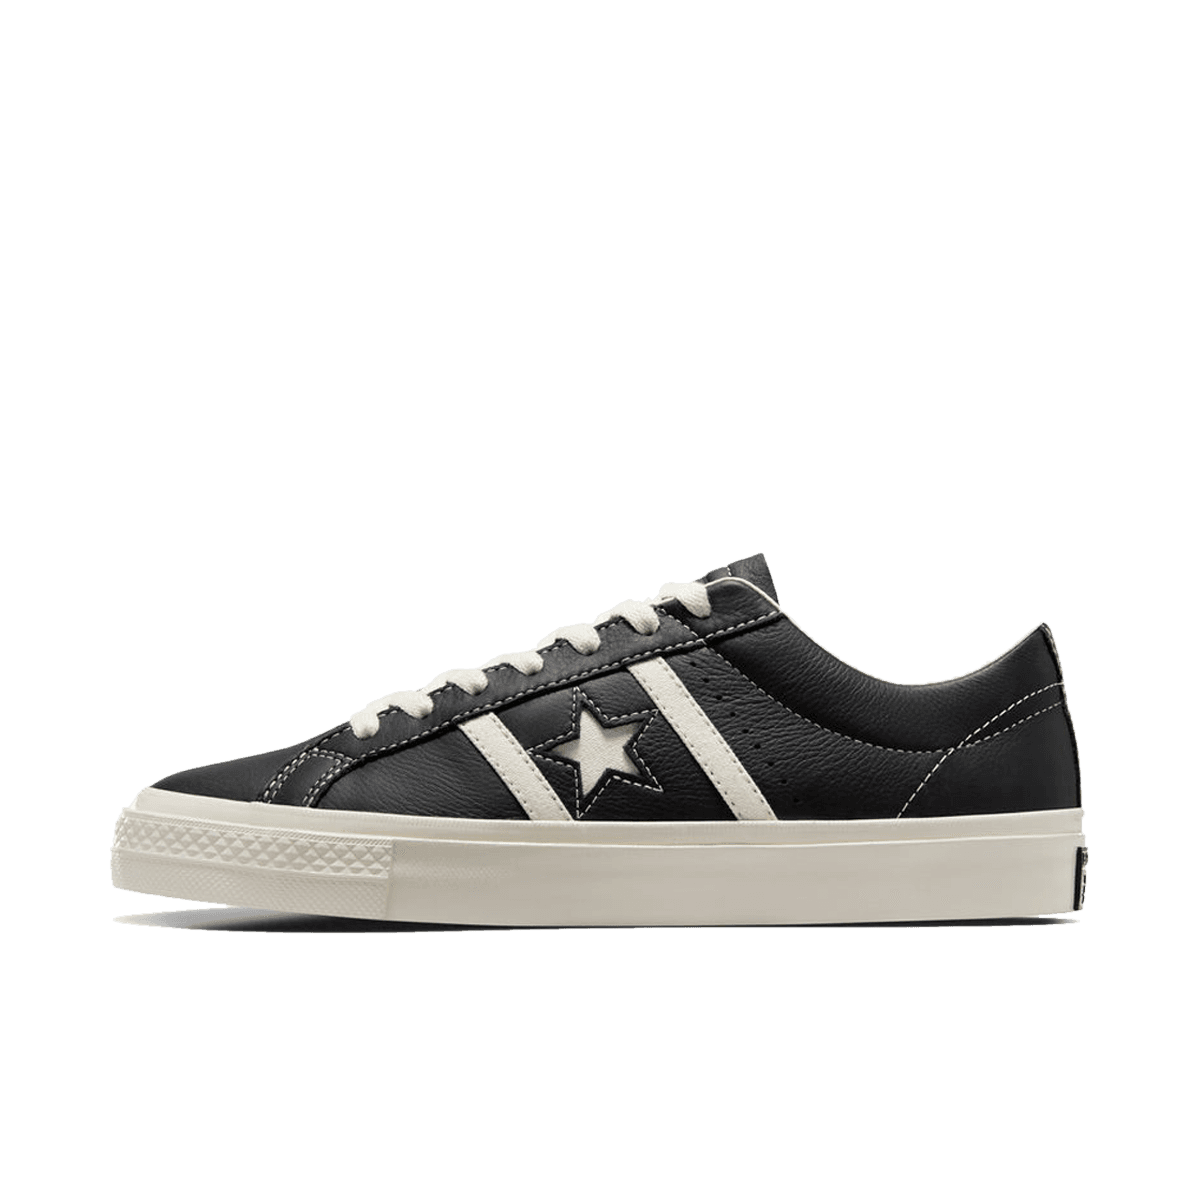 Converse One Star Academy Pro Leather 'Black'